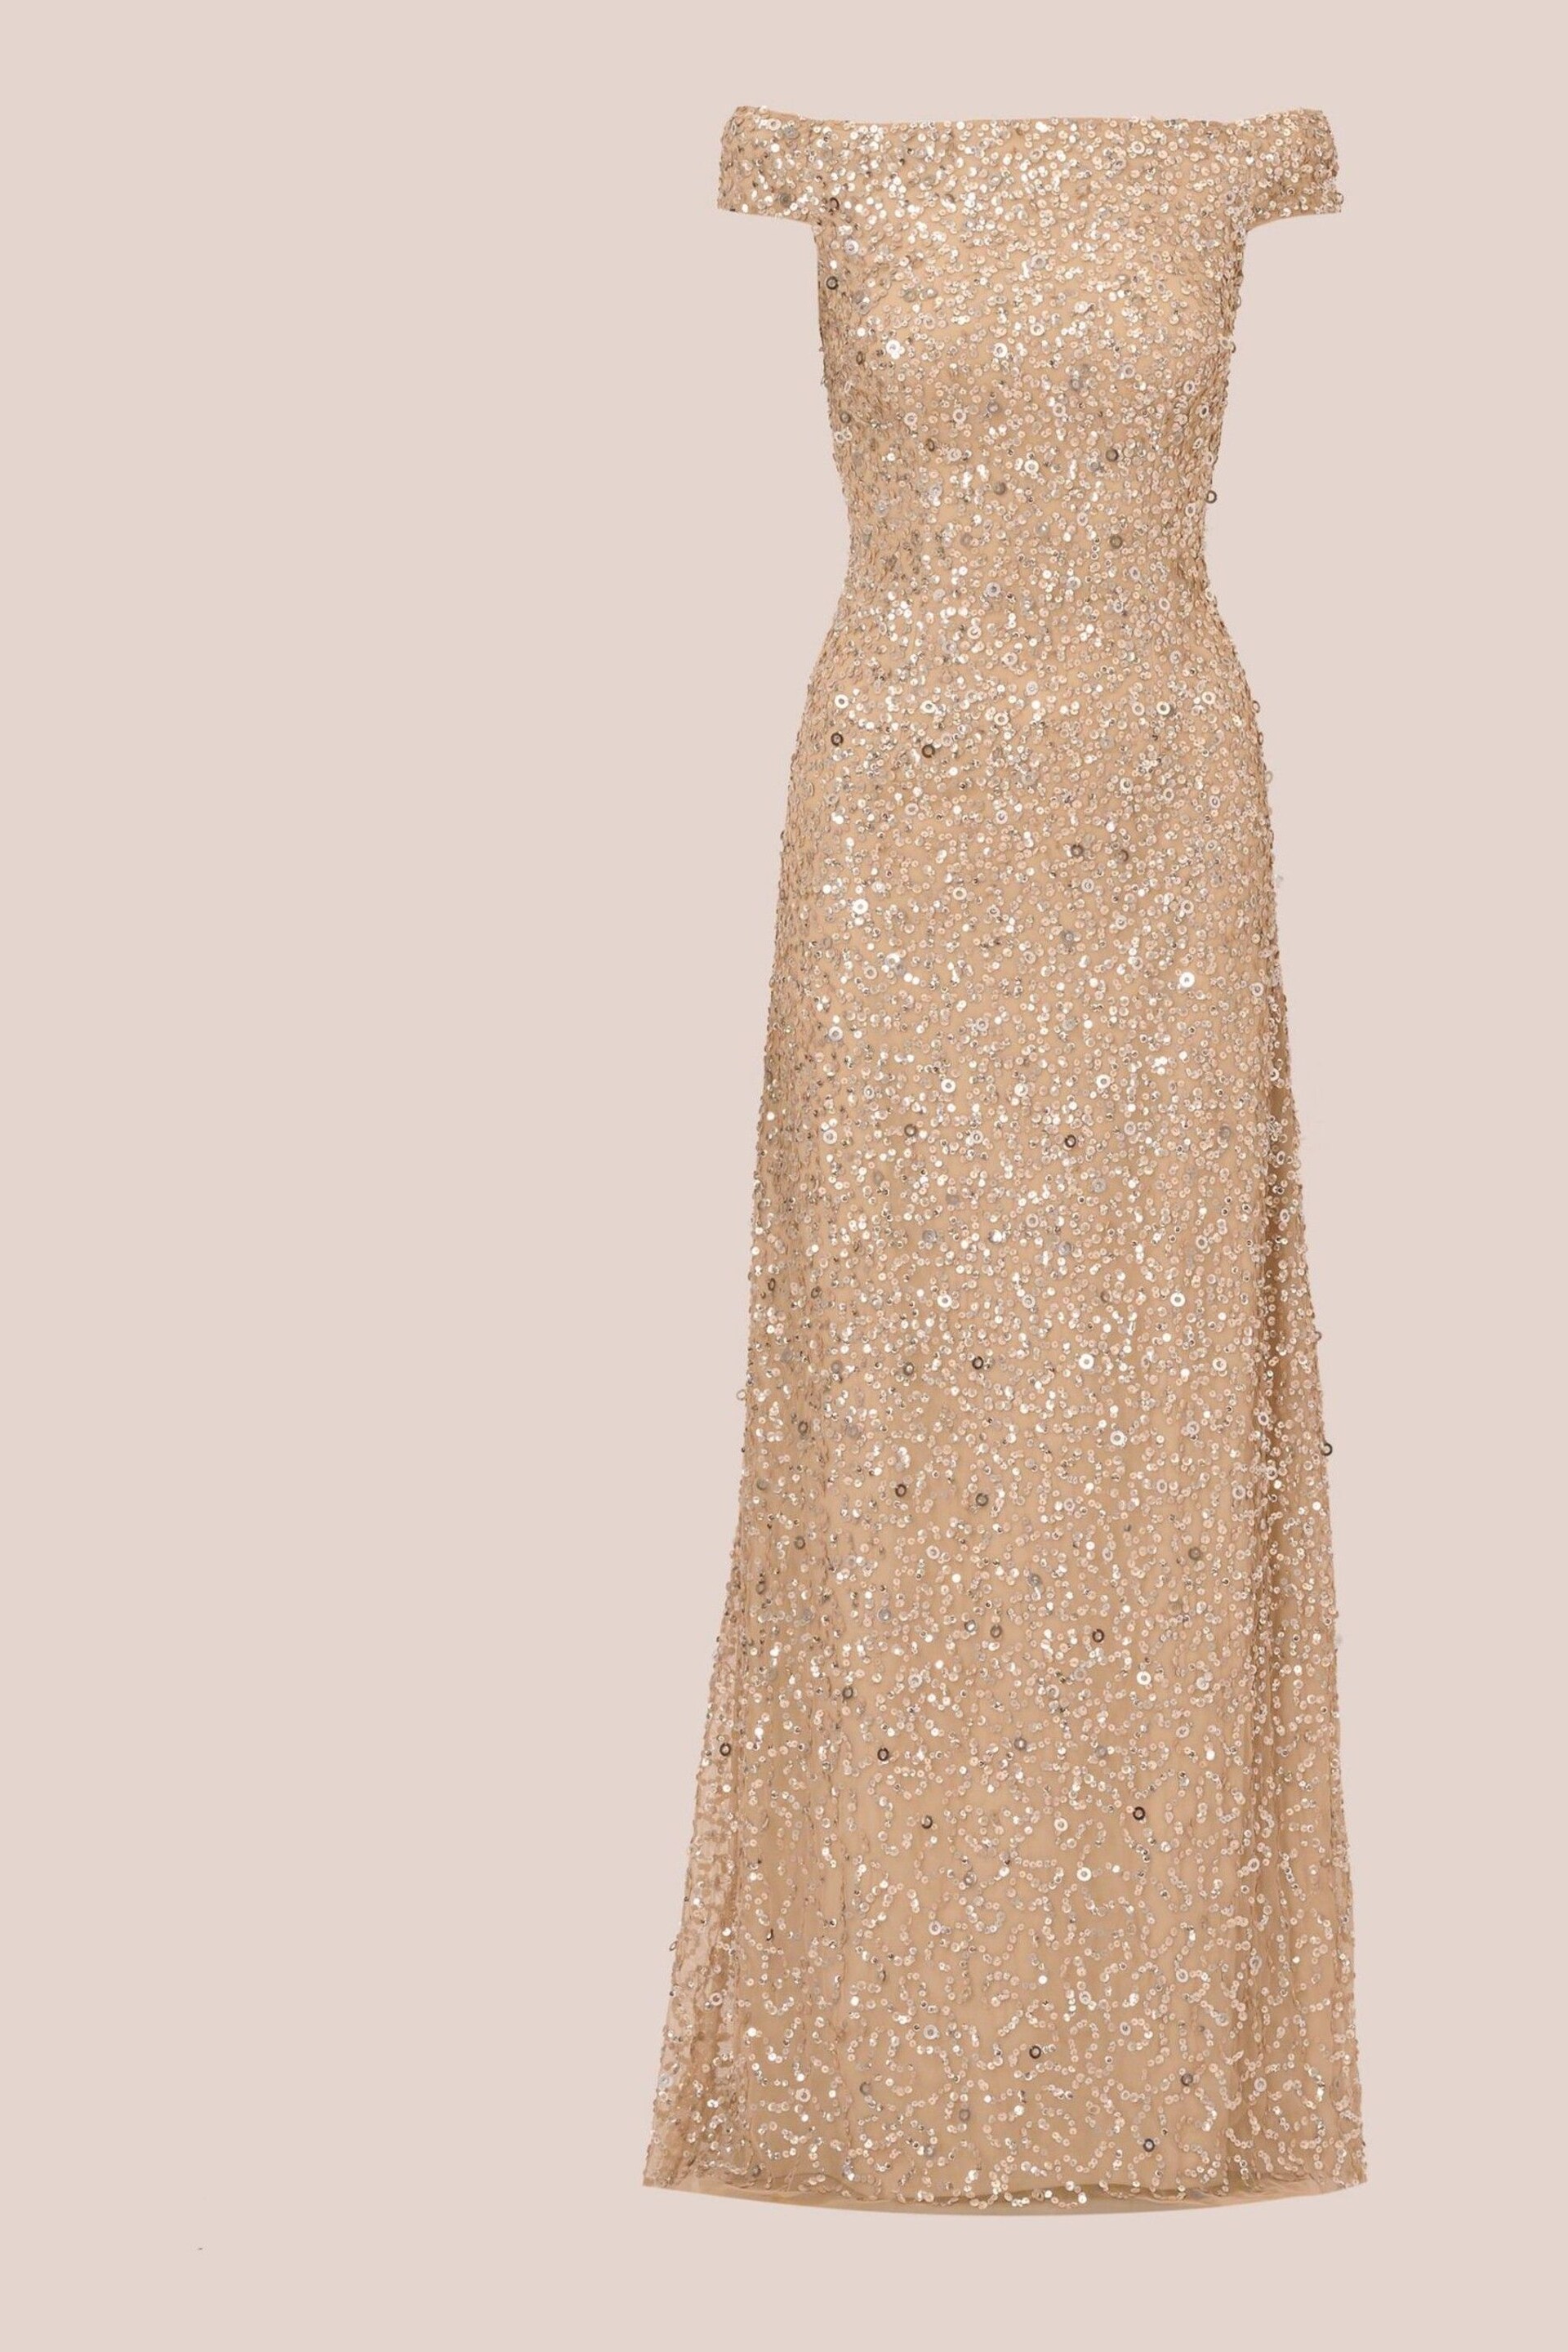 Adrianna Papell Natural Off Shlder Crunchy Bead Gown - Image 6 of 7